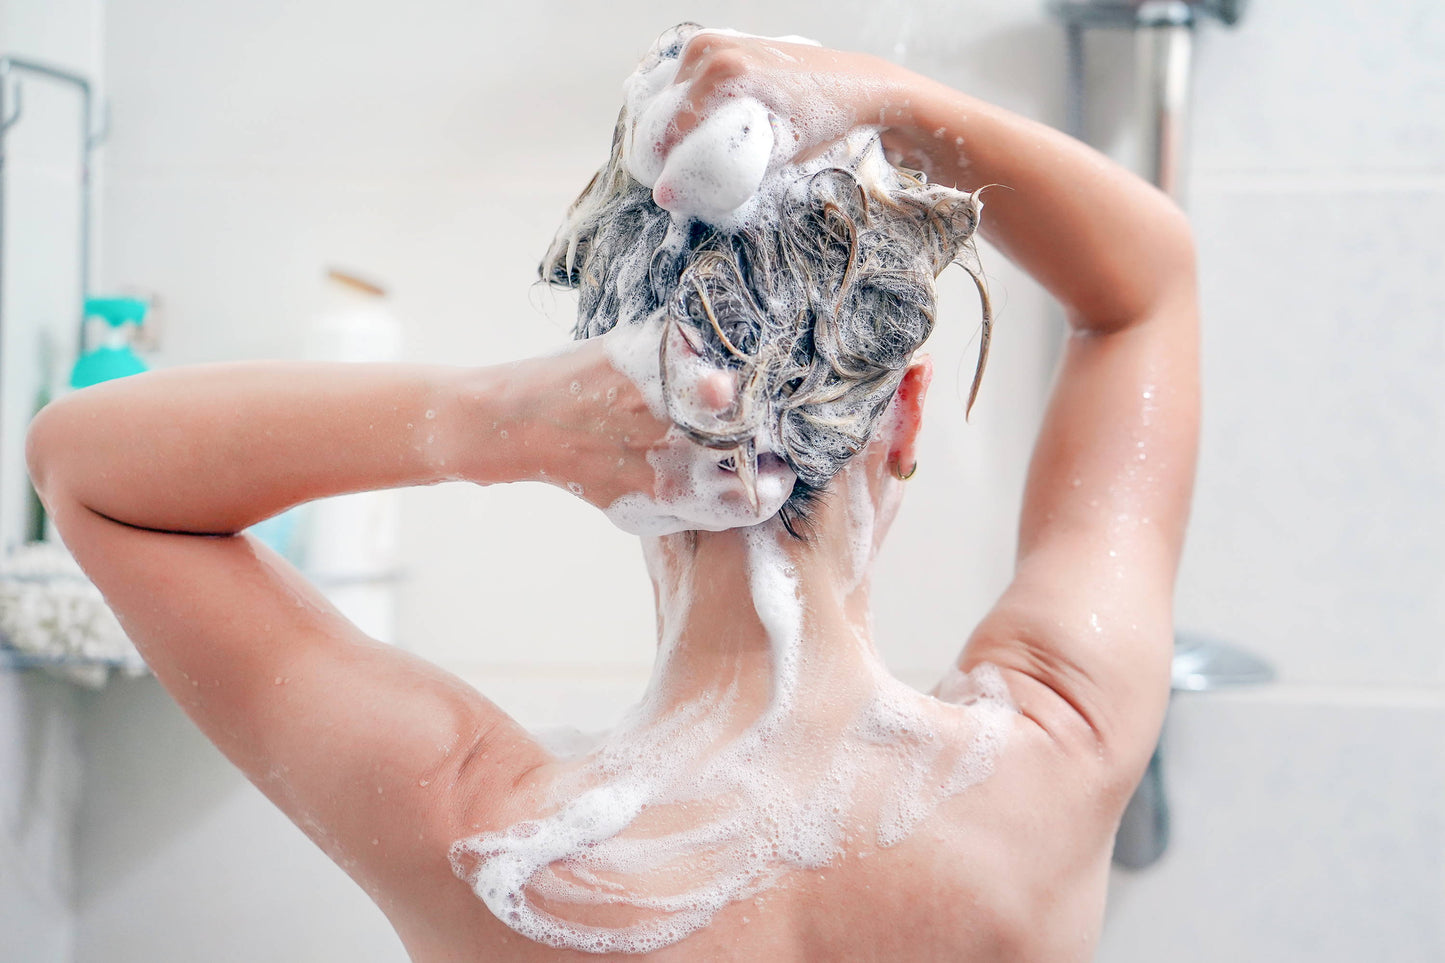 Does Sulfate Free Shampoo Cause Hair Loss?